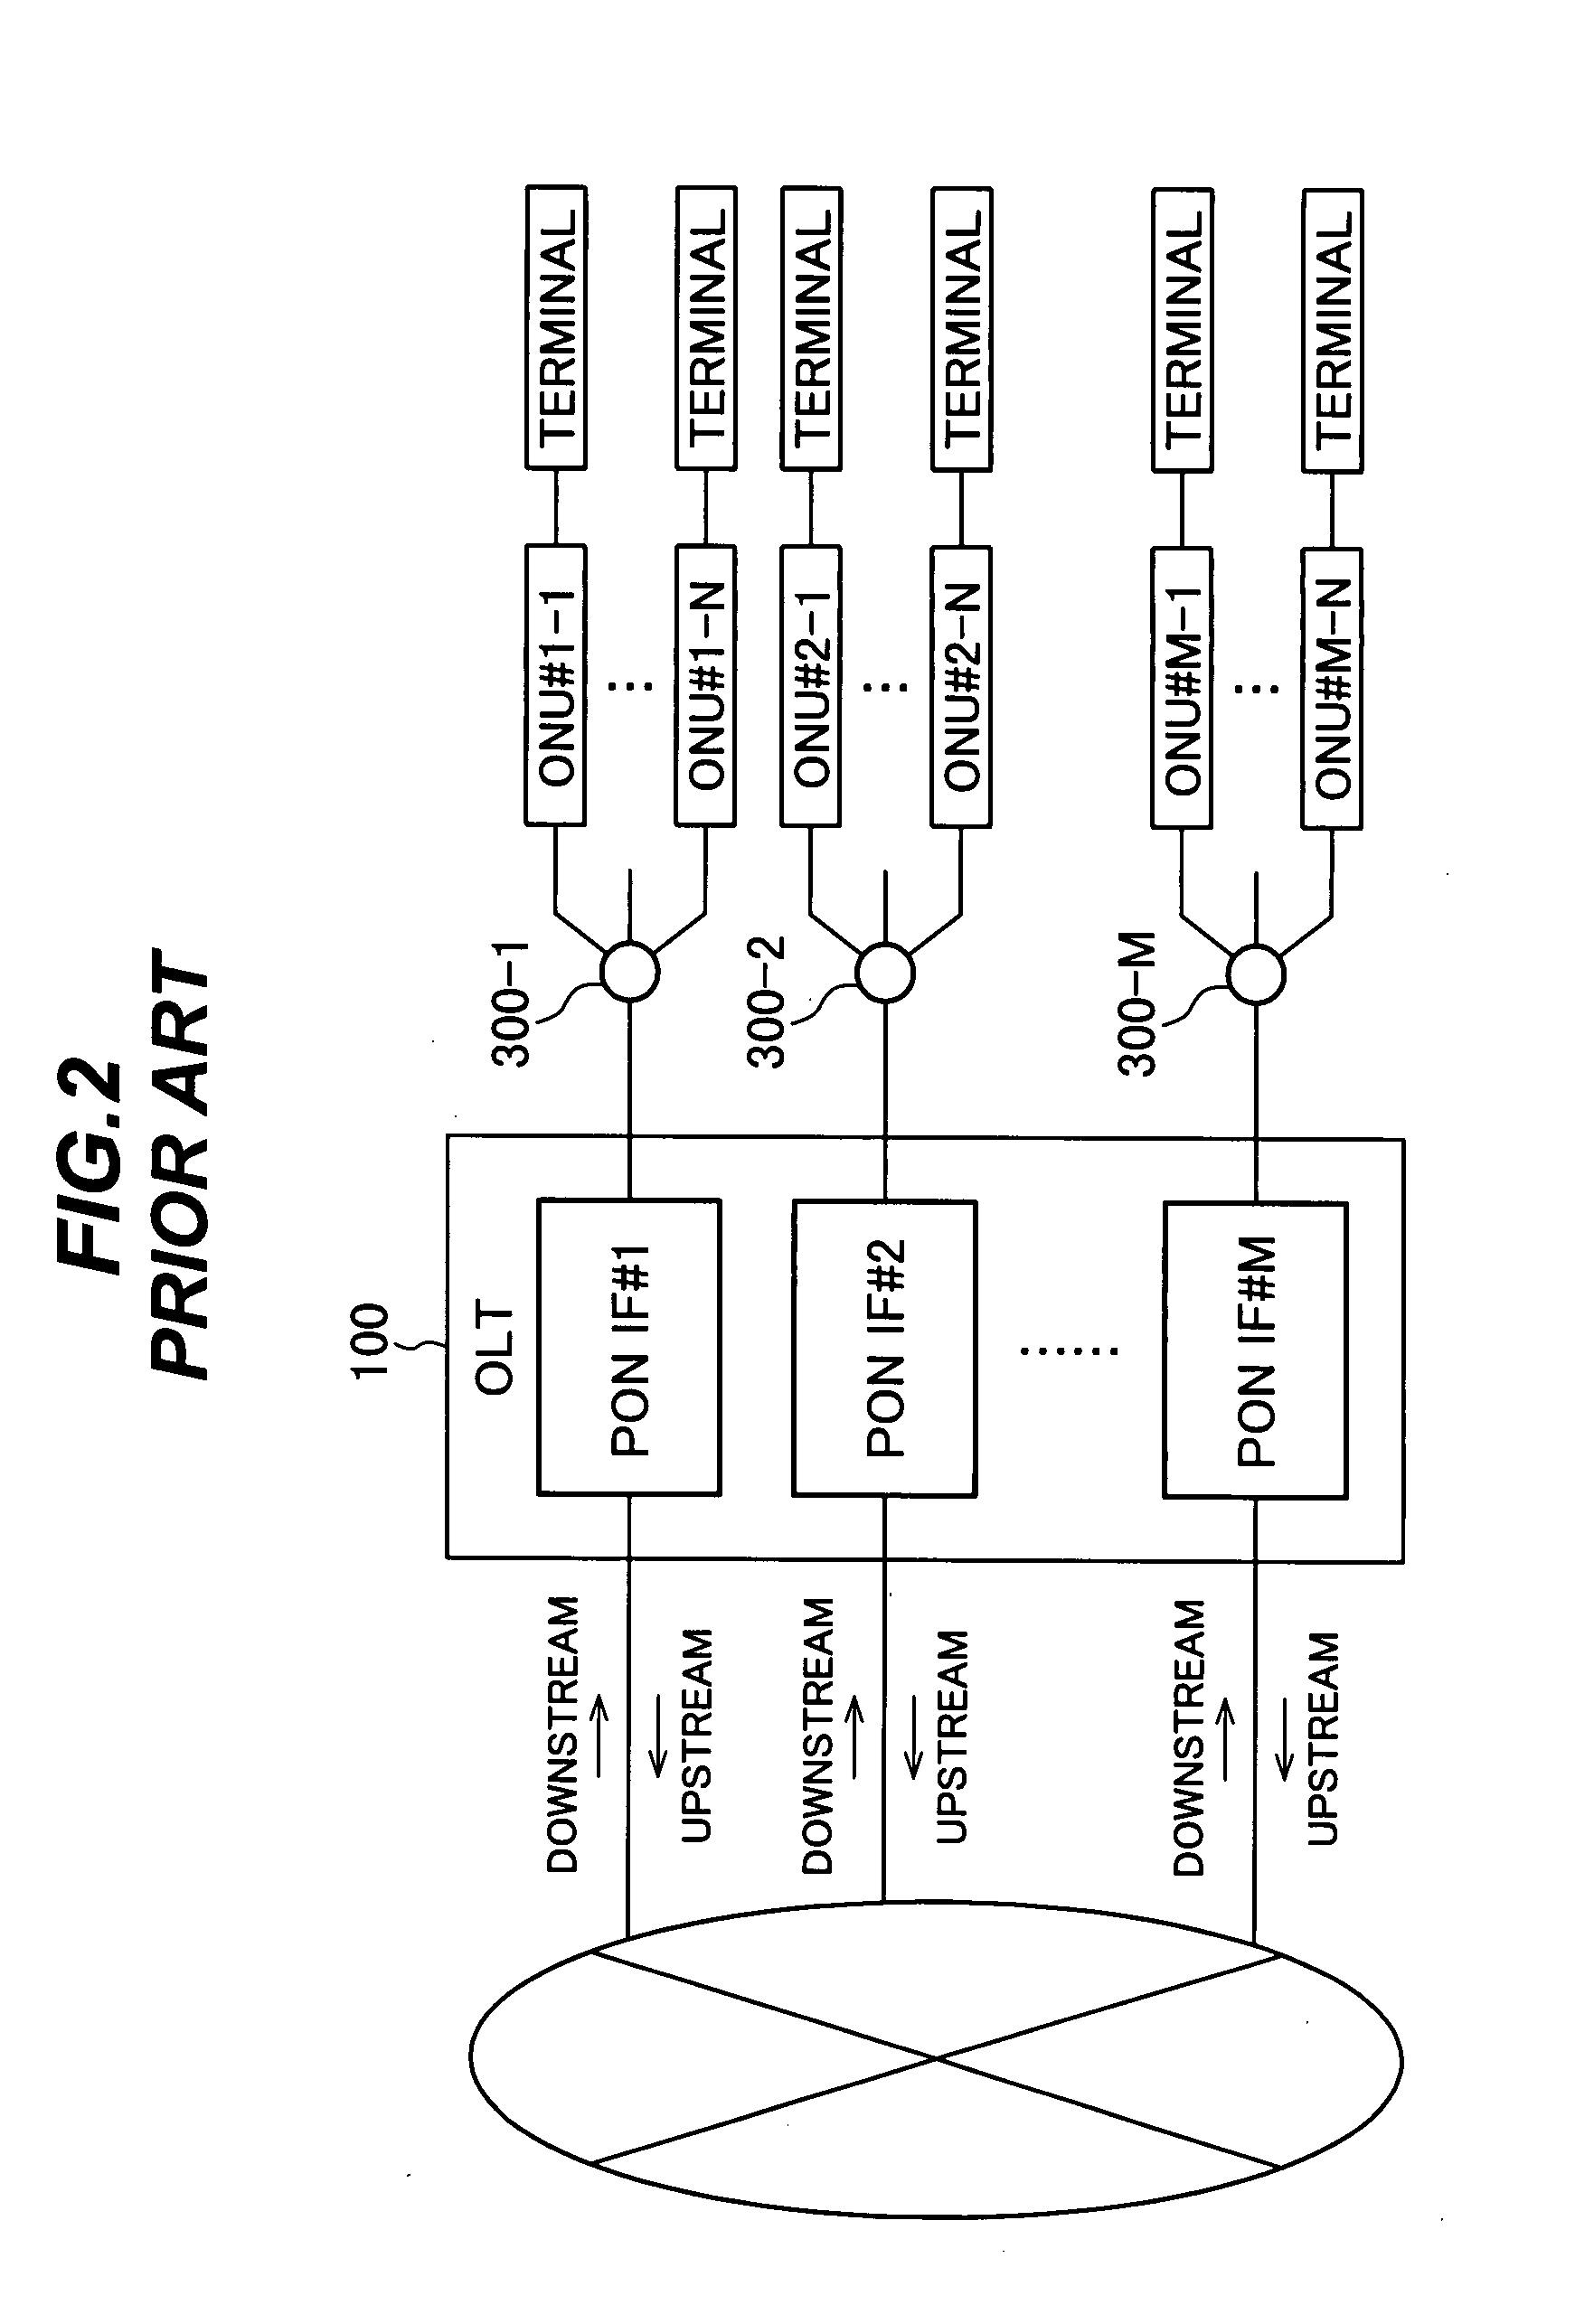 Optical communition system with N + 1 redundancy